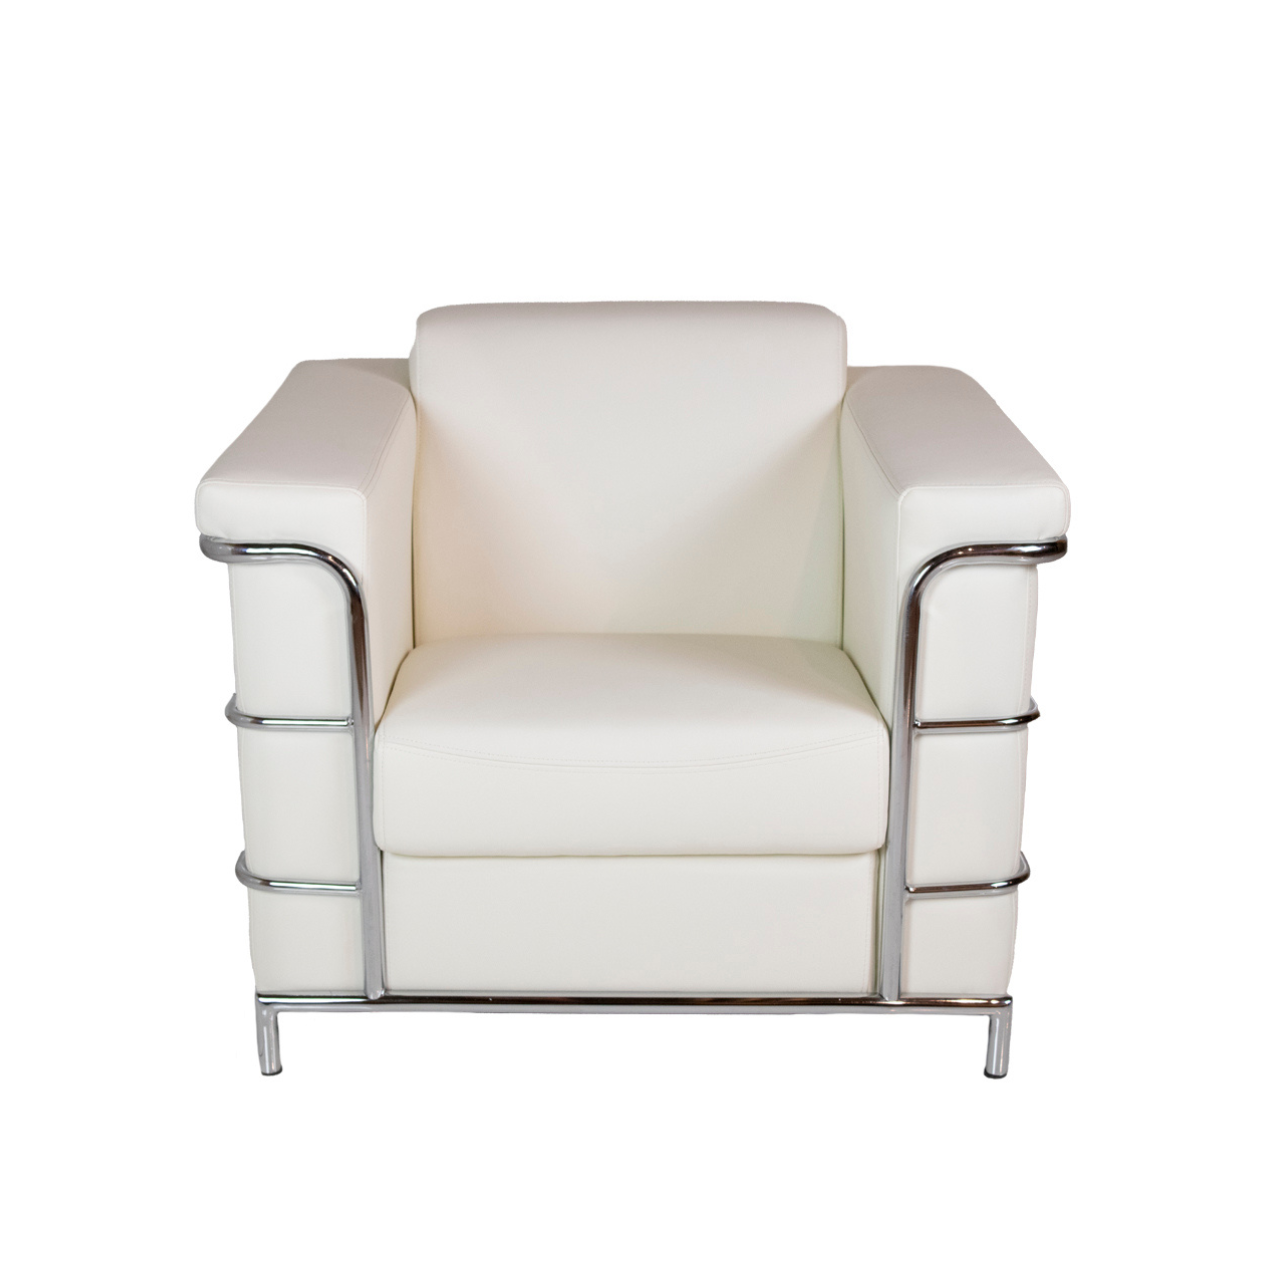 Compel Zia Lounge Armchair - White - New CLOSEOUT